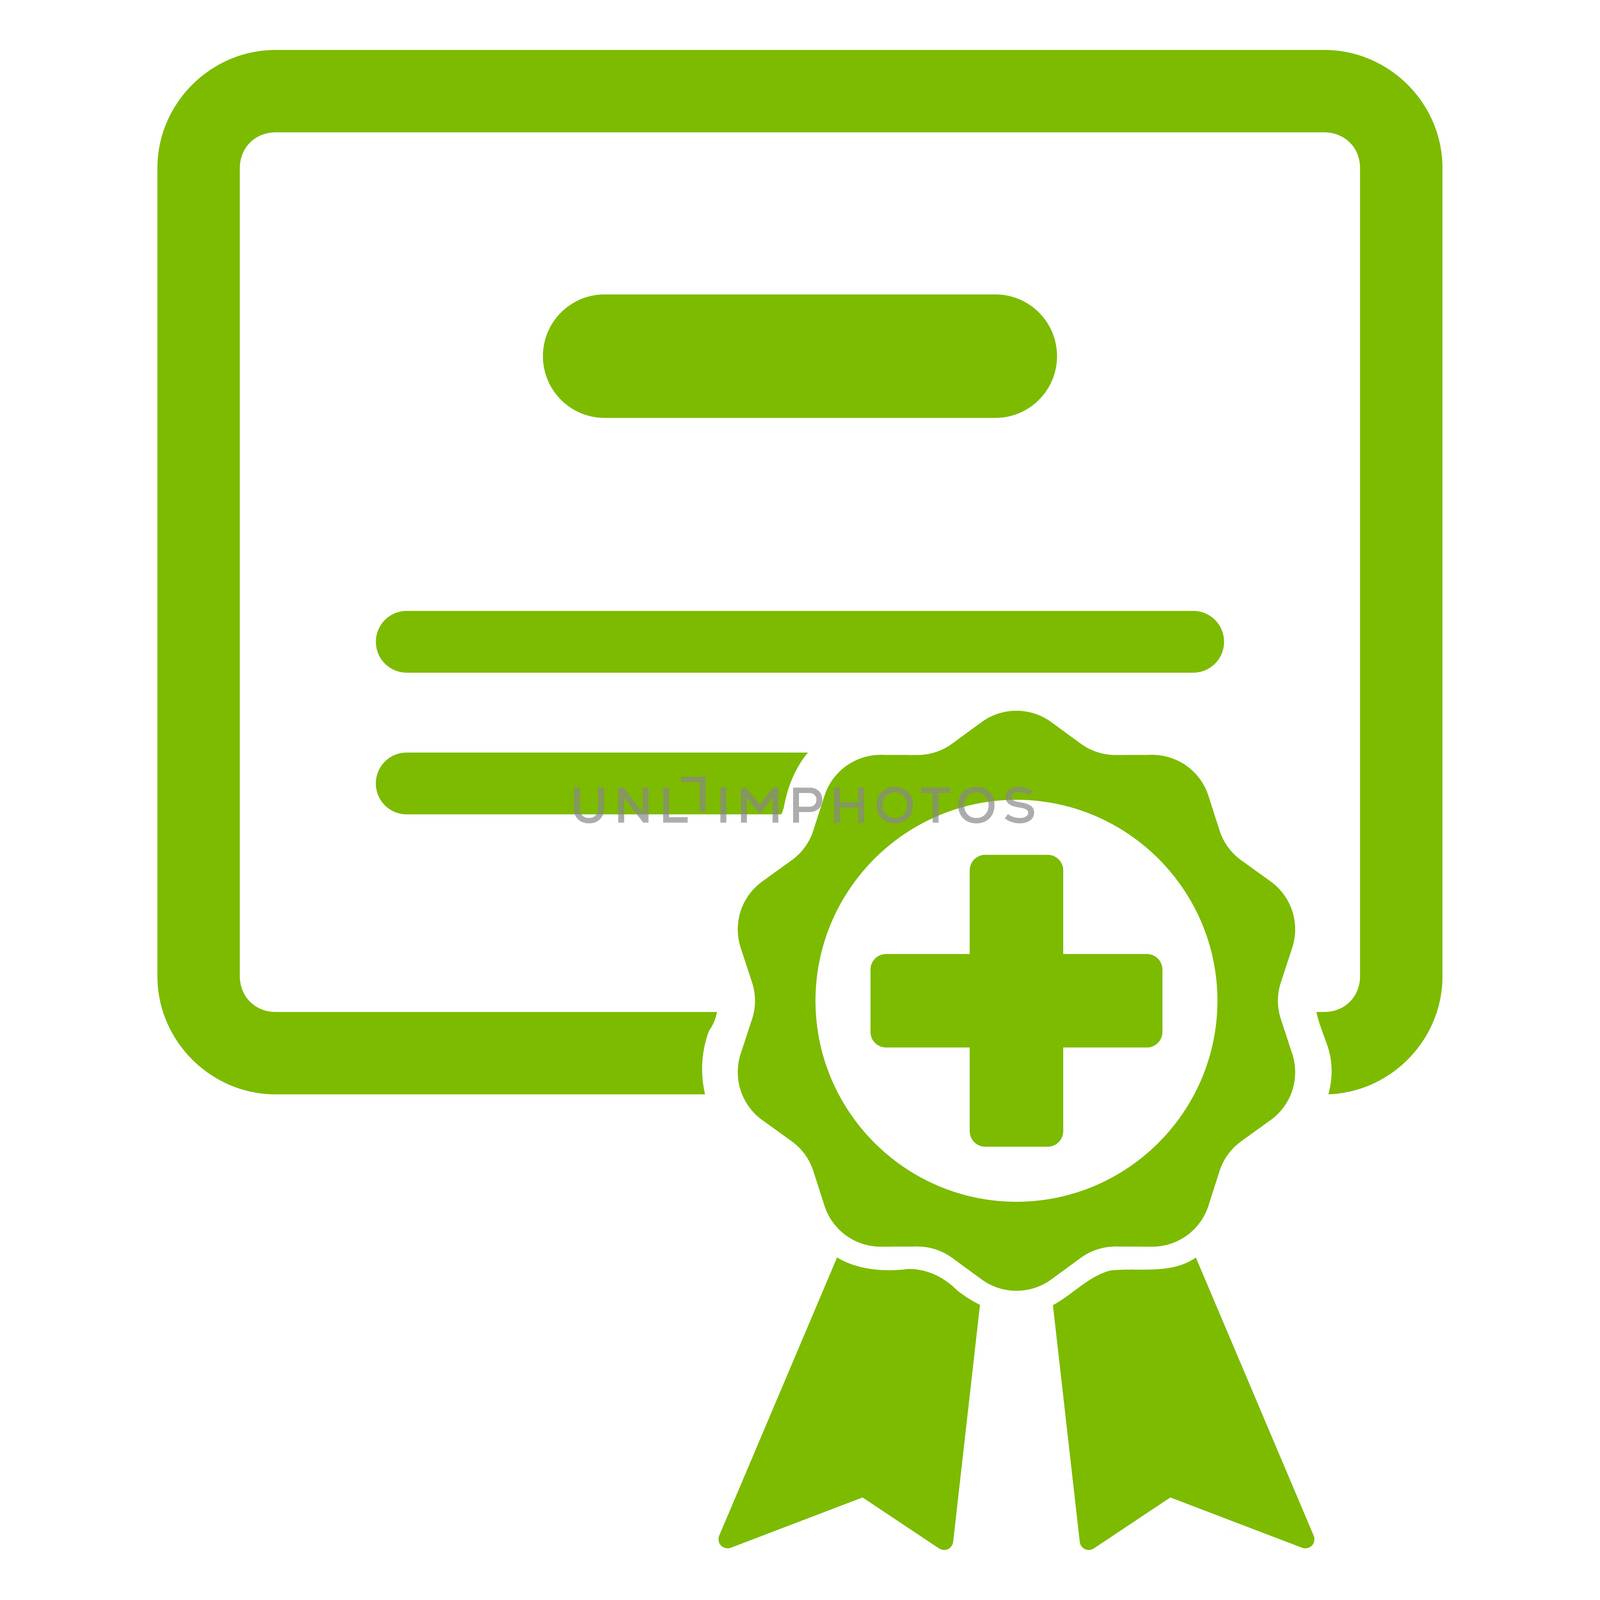 Medical Certificate raster icon. Style is flat symbol, eco green color, rounded angles, white background.